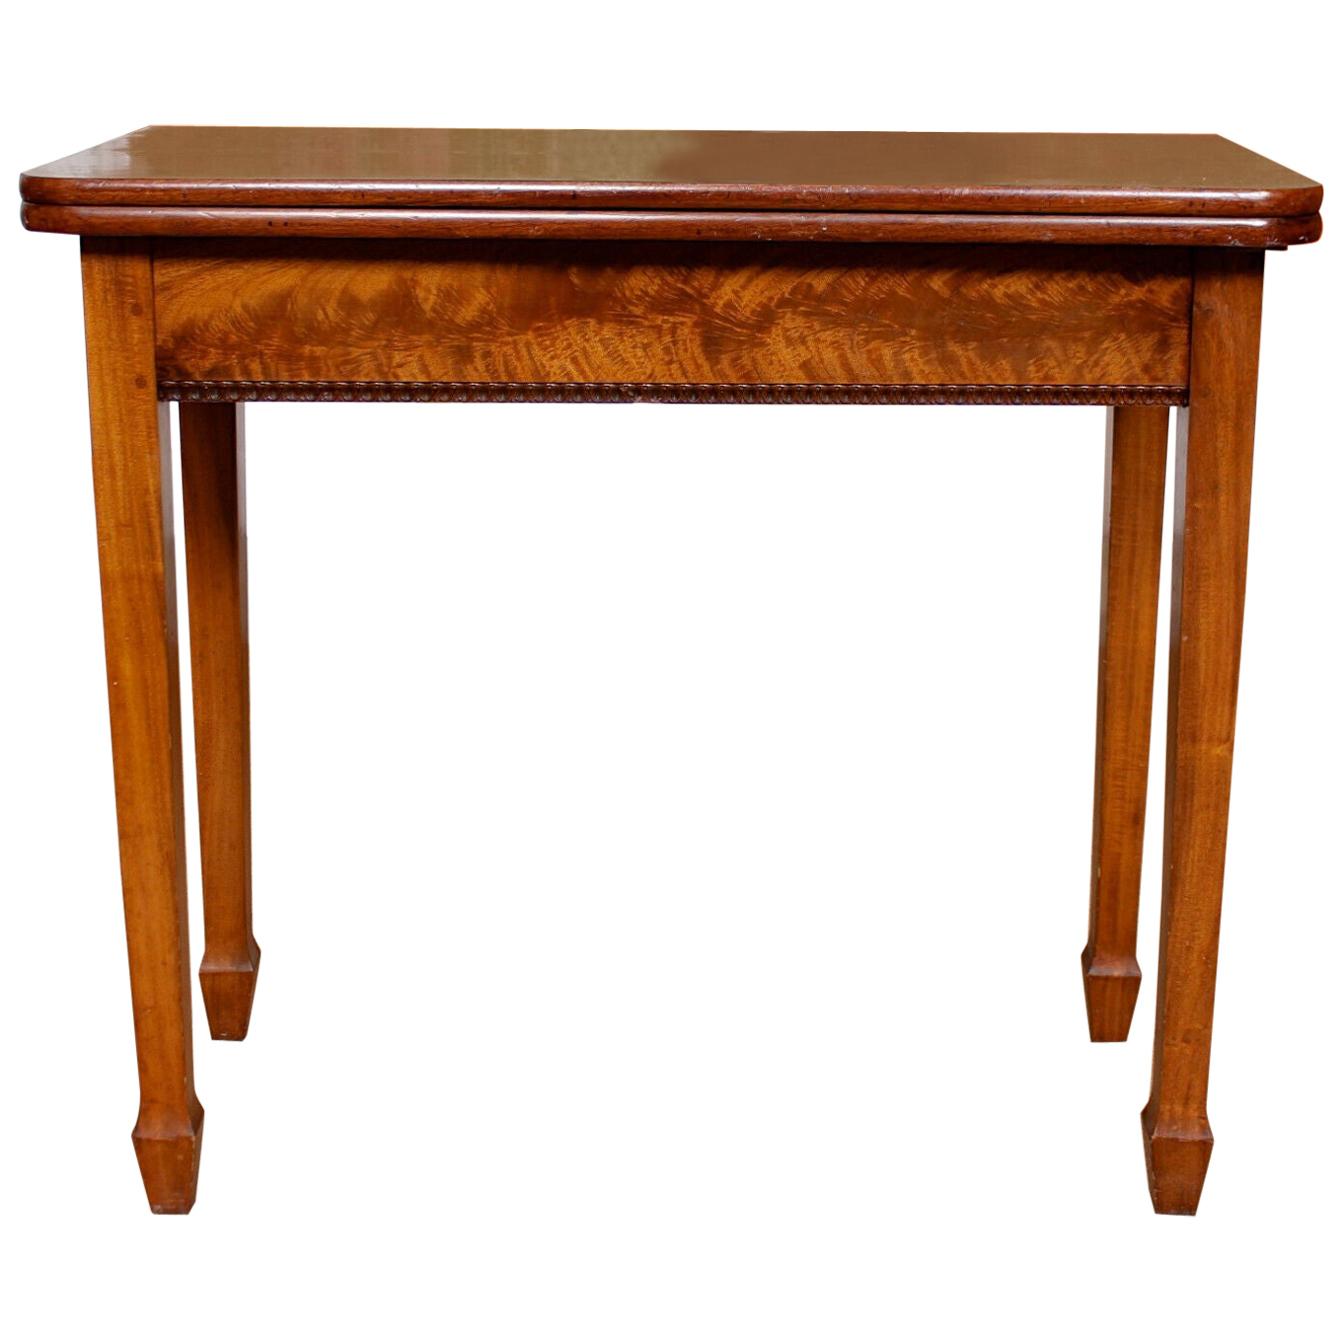 English Writing Table 19th Century Flamed Mahogany Folding Card Console Table For Sale